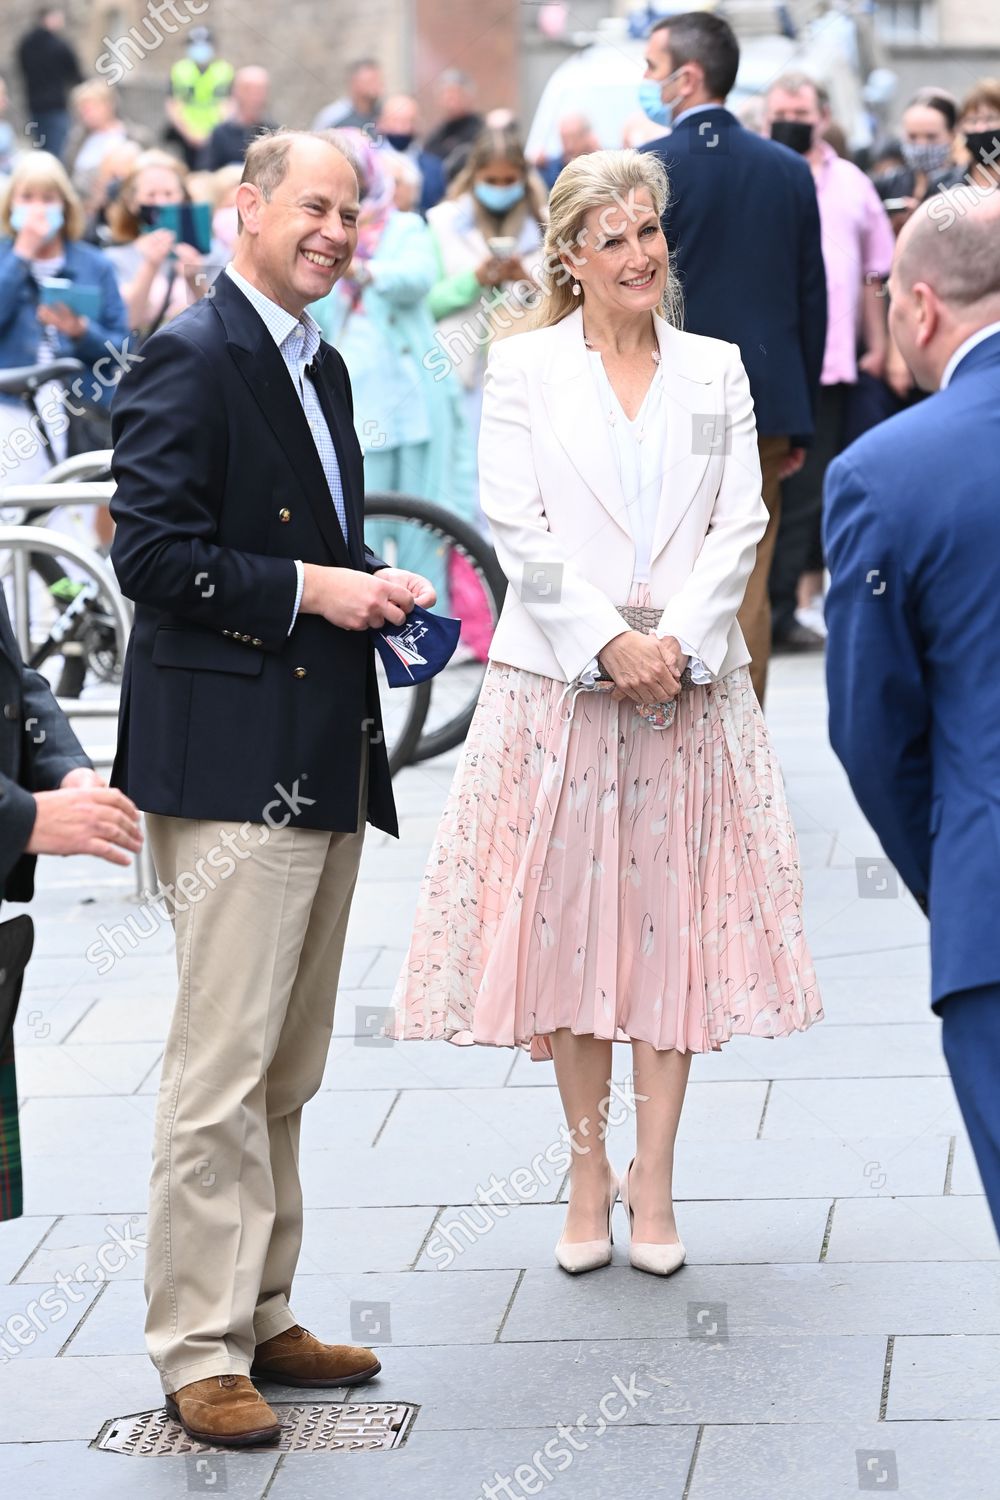 CASA REAL BRITÁNICA - Página 77 Prince-edward-and-sophie-countess-of-wessex-visit-to-edinburgh-scotland-uk-shutterstock-editorial-12173651n